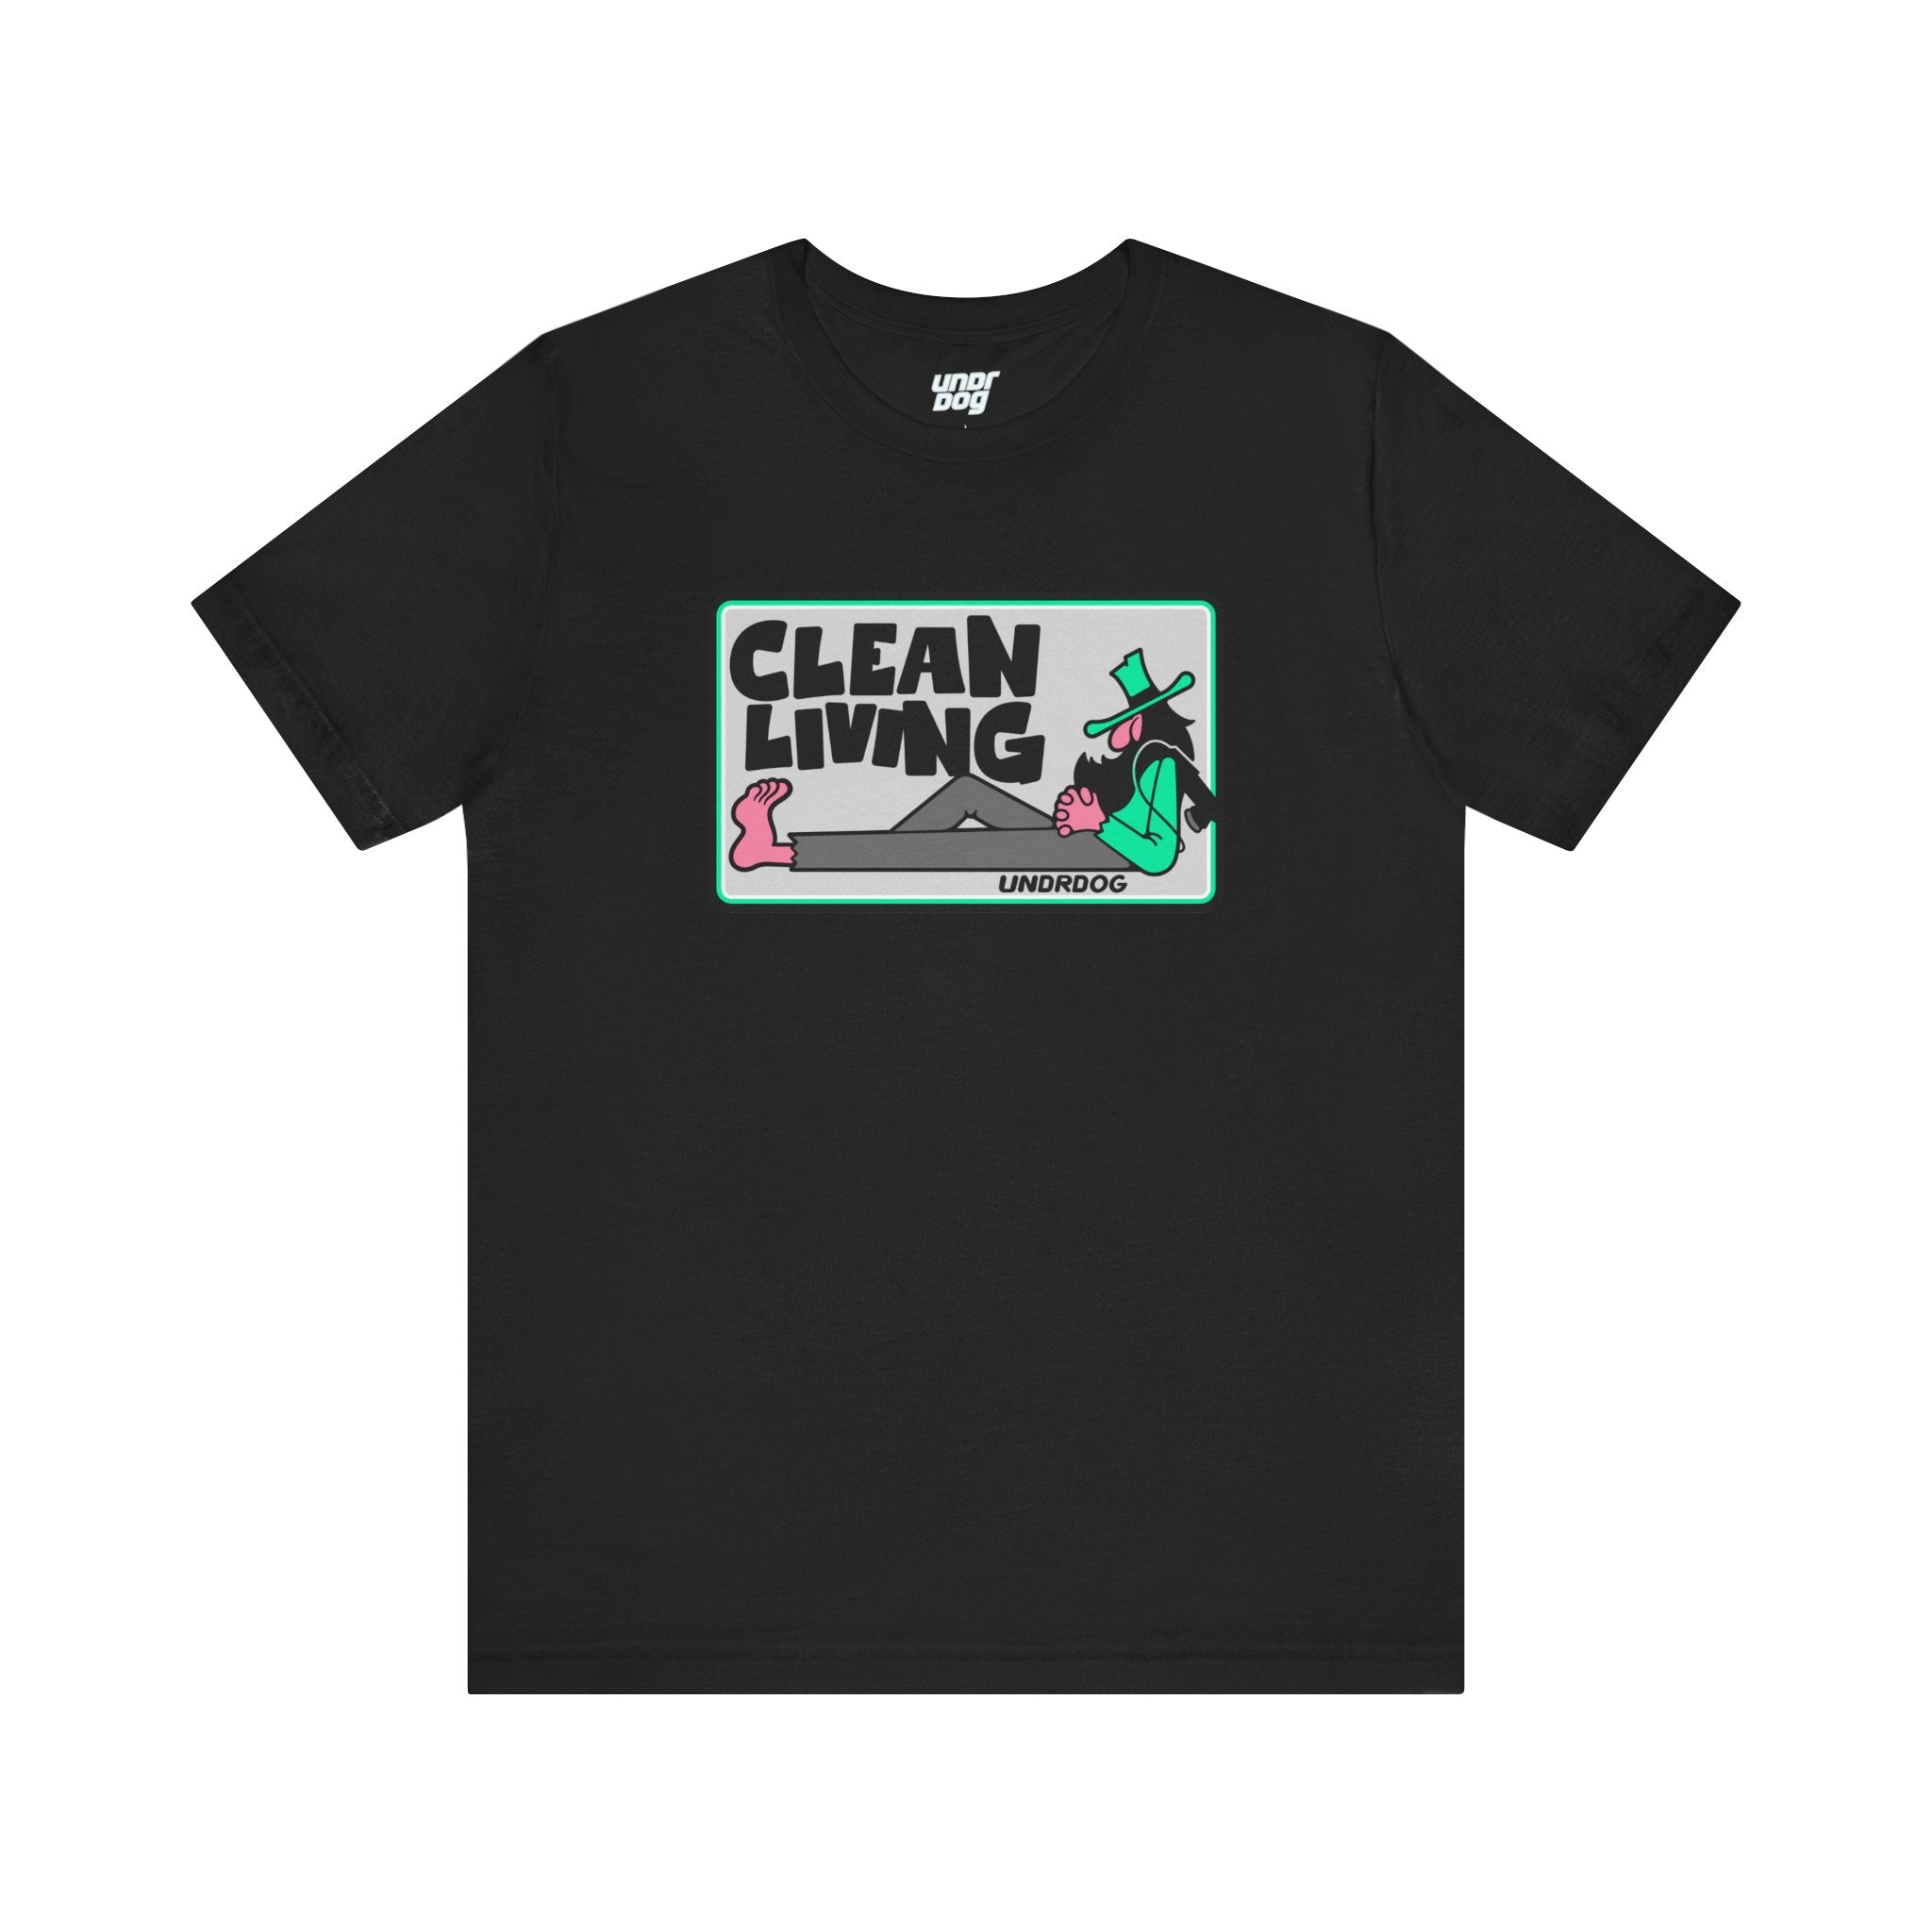 17539570548898763161_2048.jpg - Clean Living v2 by Undrdog Tee - Undrdog Surface Products